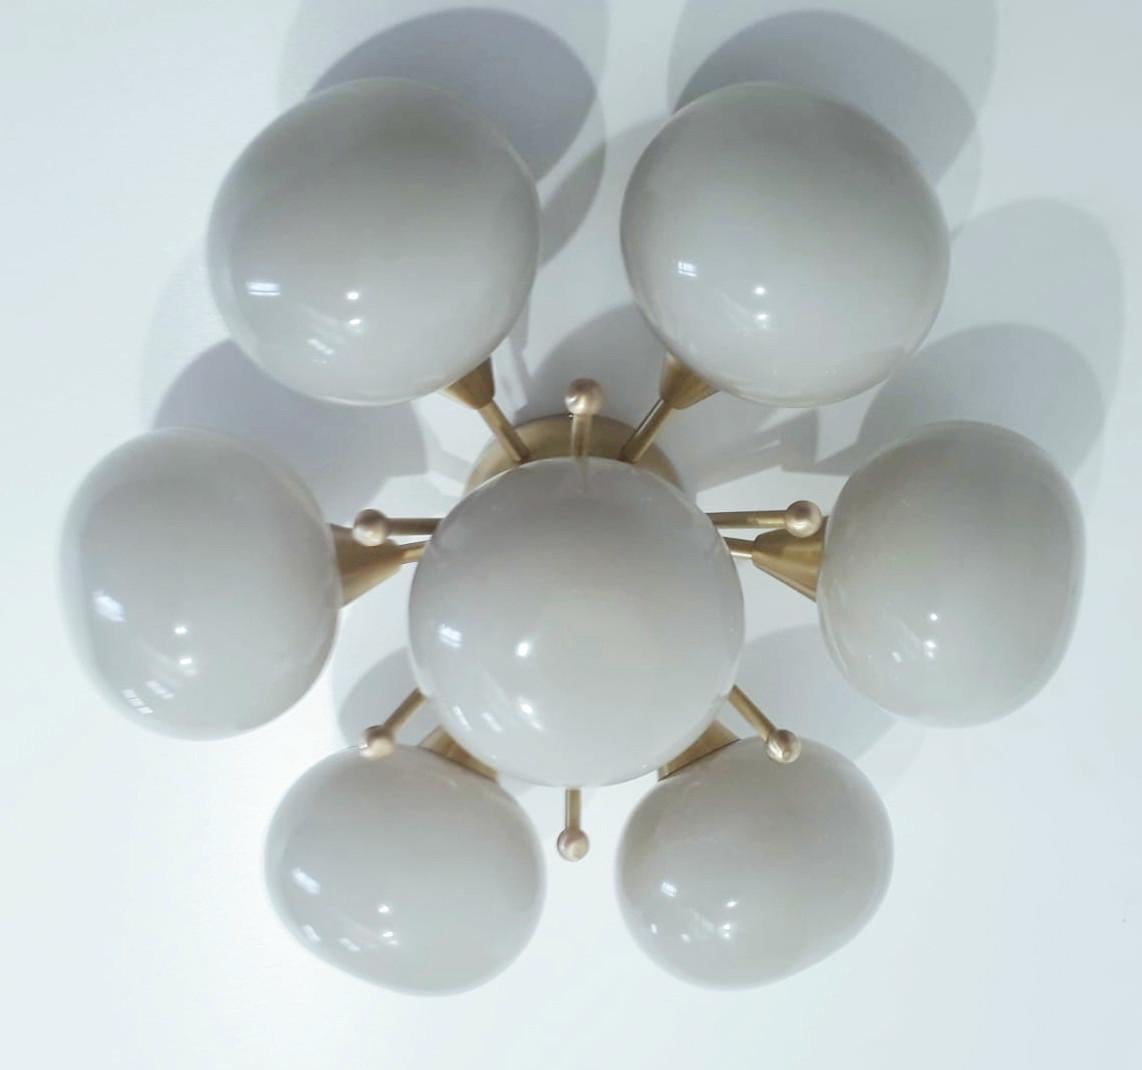 Italian flush mount with gray Murano glass pebble shades mounted on solid brass frame
Designed by Fabio Bergomi / Made in Italy
7 lights / E12 or E14 type / max 40W each
Diameter: 24 inches / Height: 12 inches
Order only / This item ships from